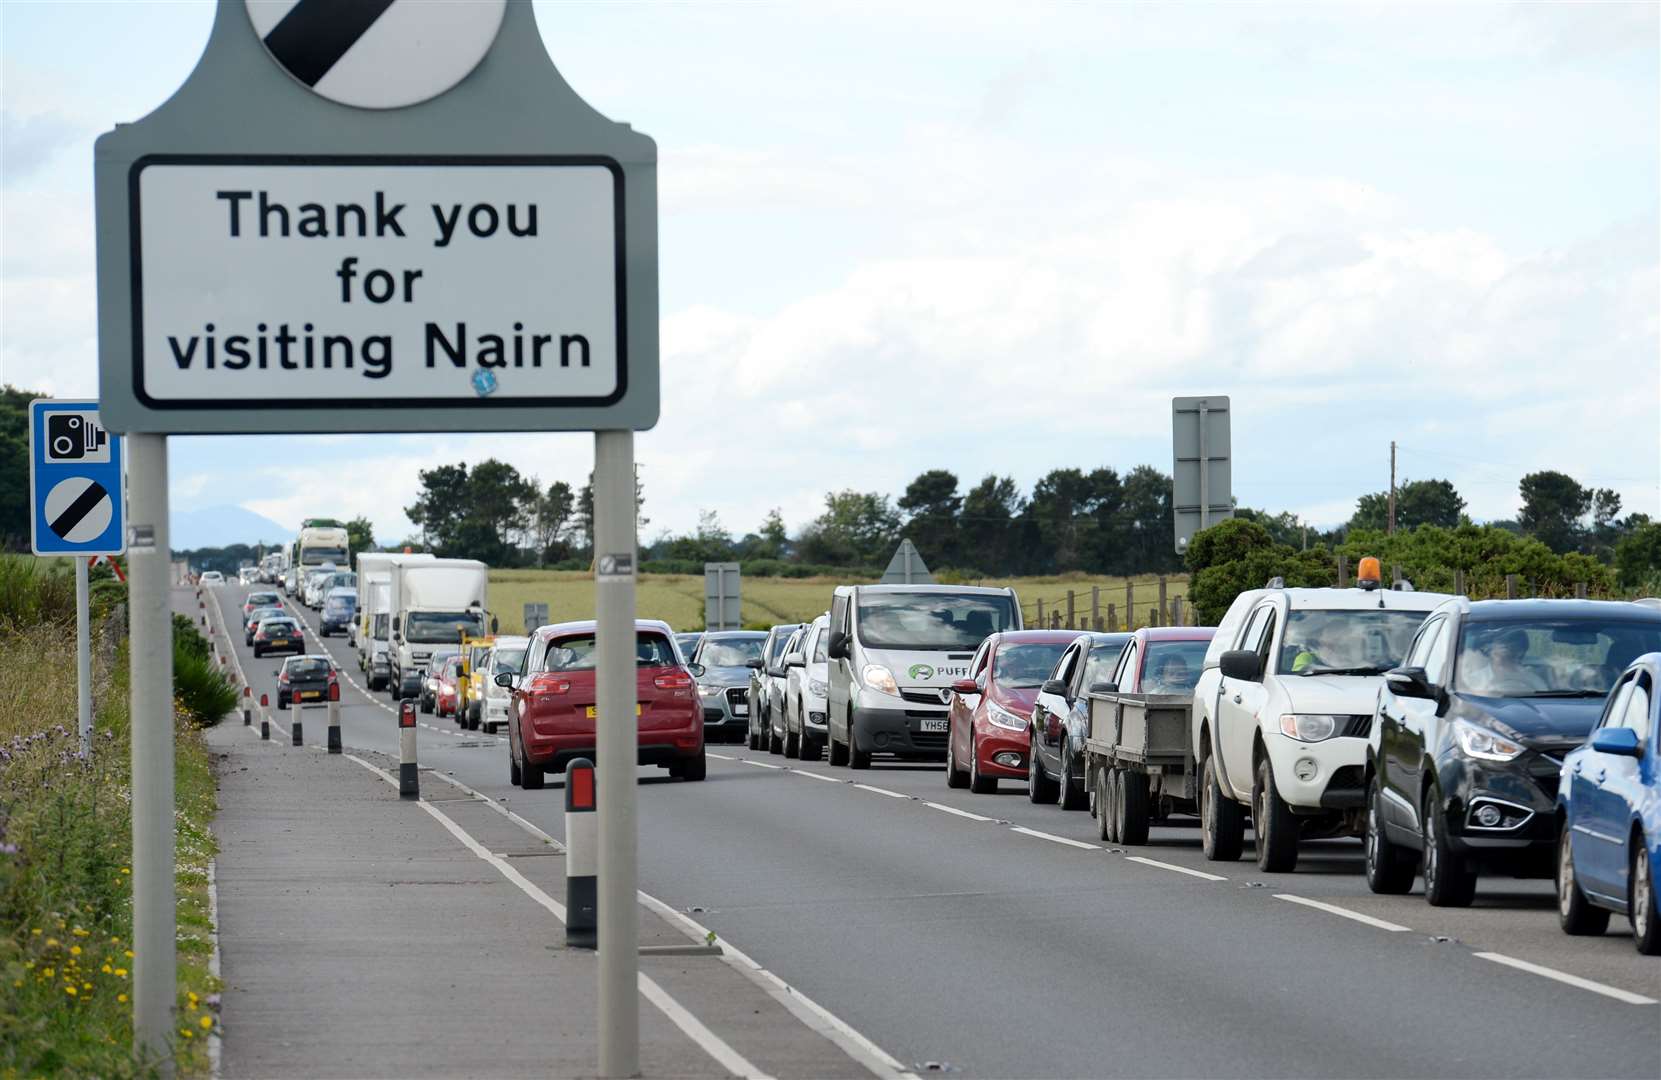 Traffic heading into Nairn on the A96.